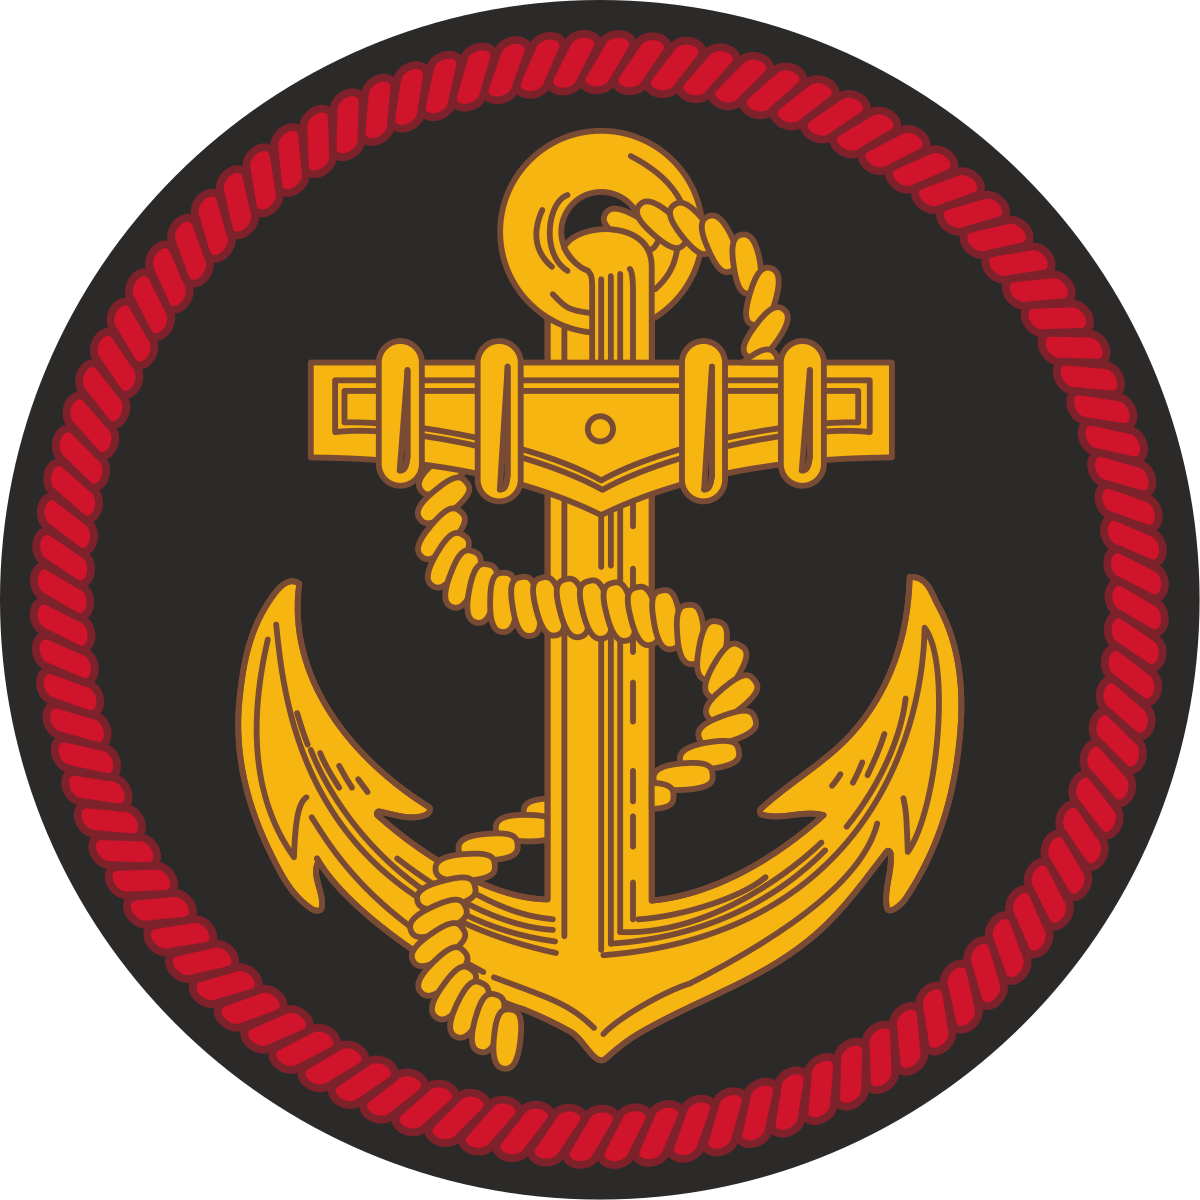 Infantry Logo - Naval Infantry (Russia)